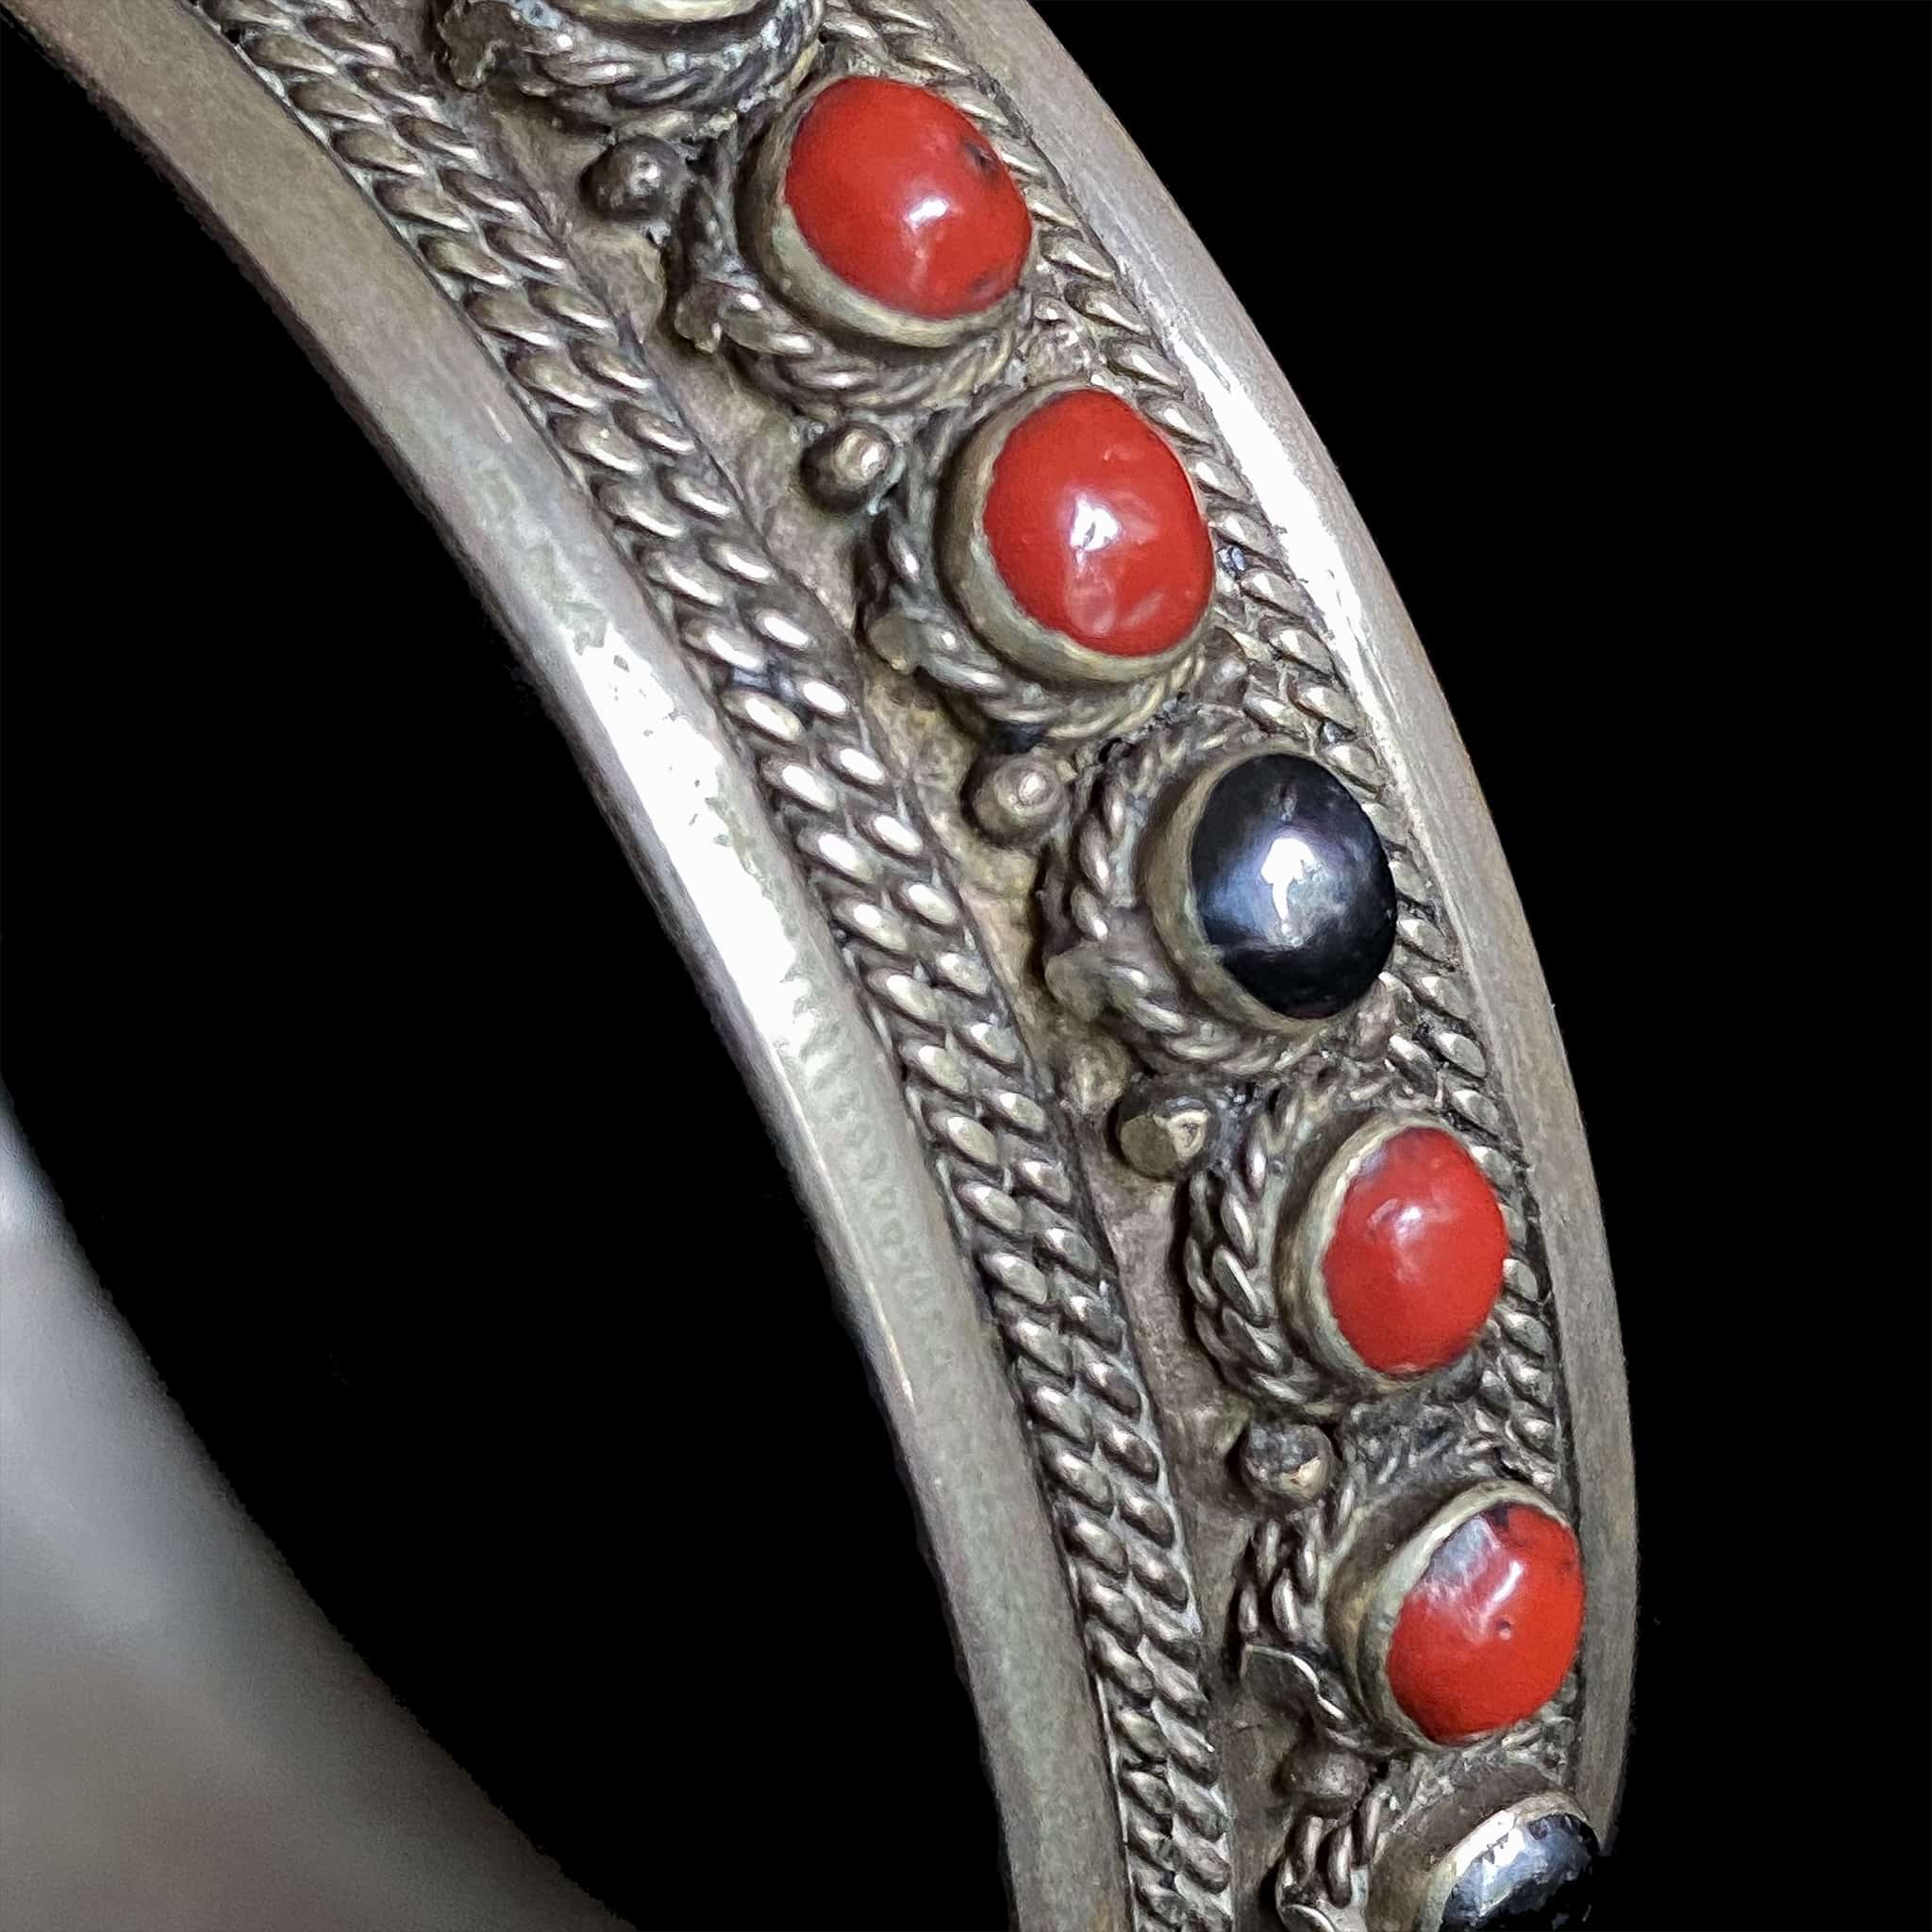 Vintage Moroccan Bangle with Coral and Onyx Decoration